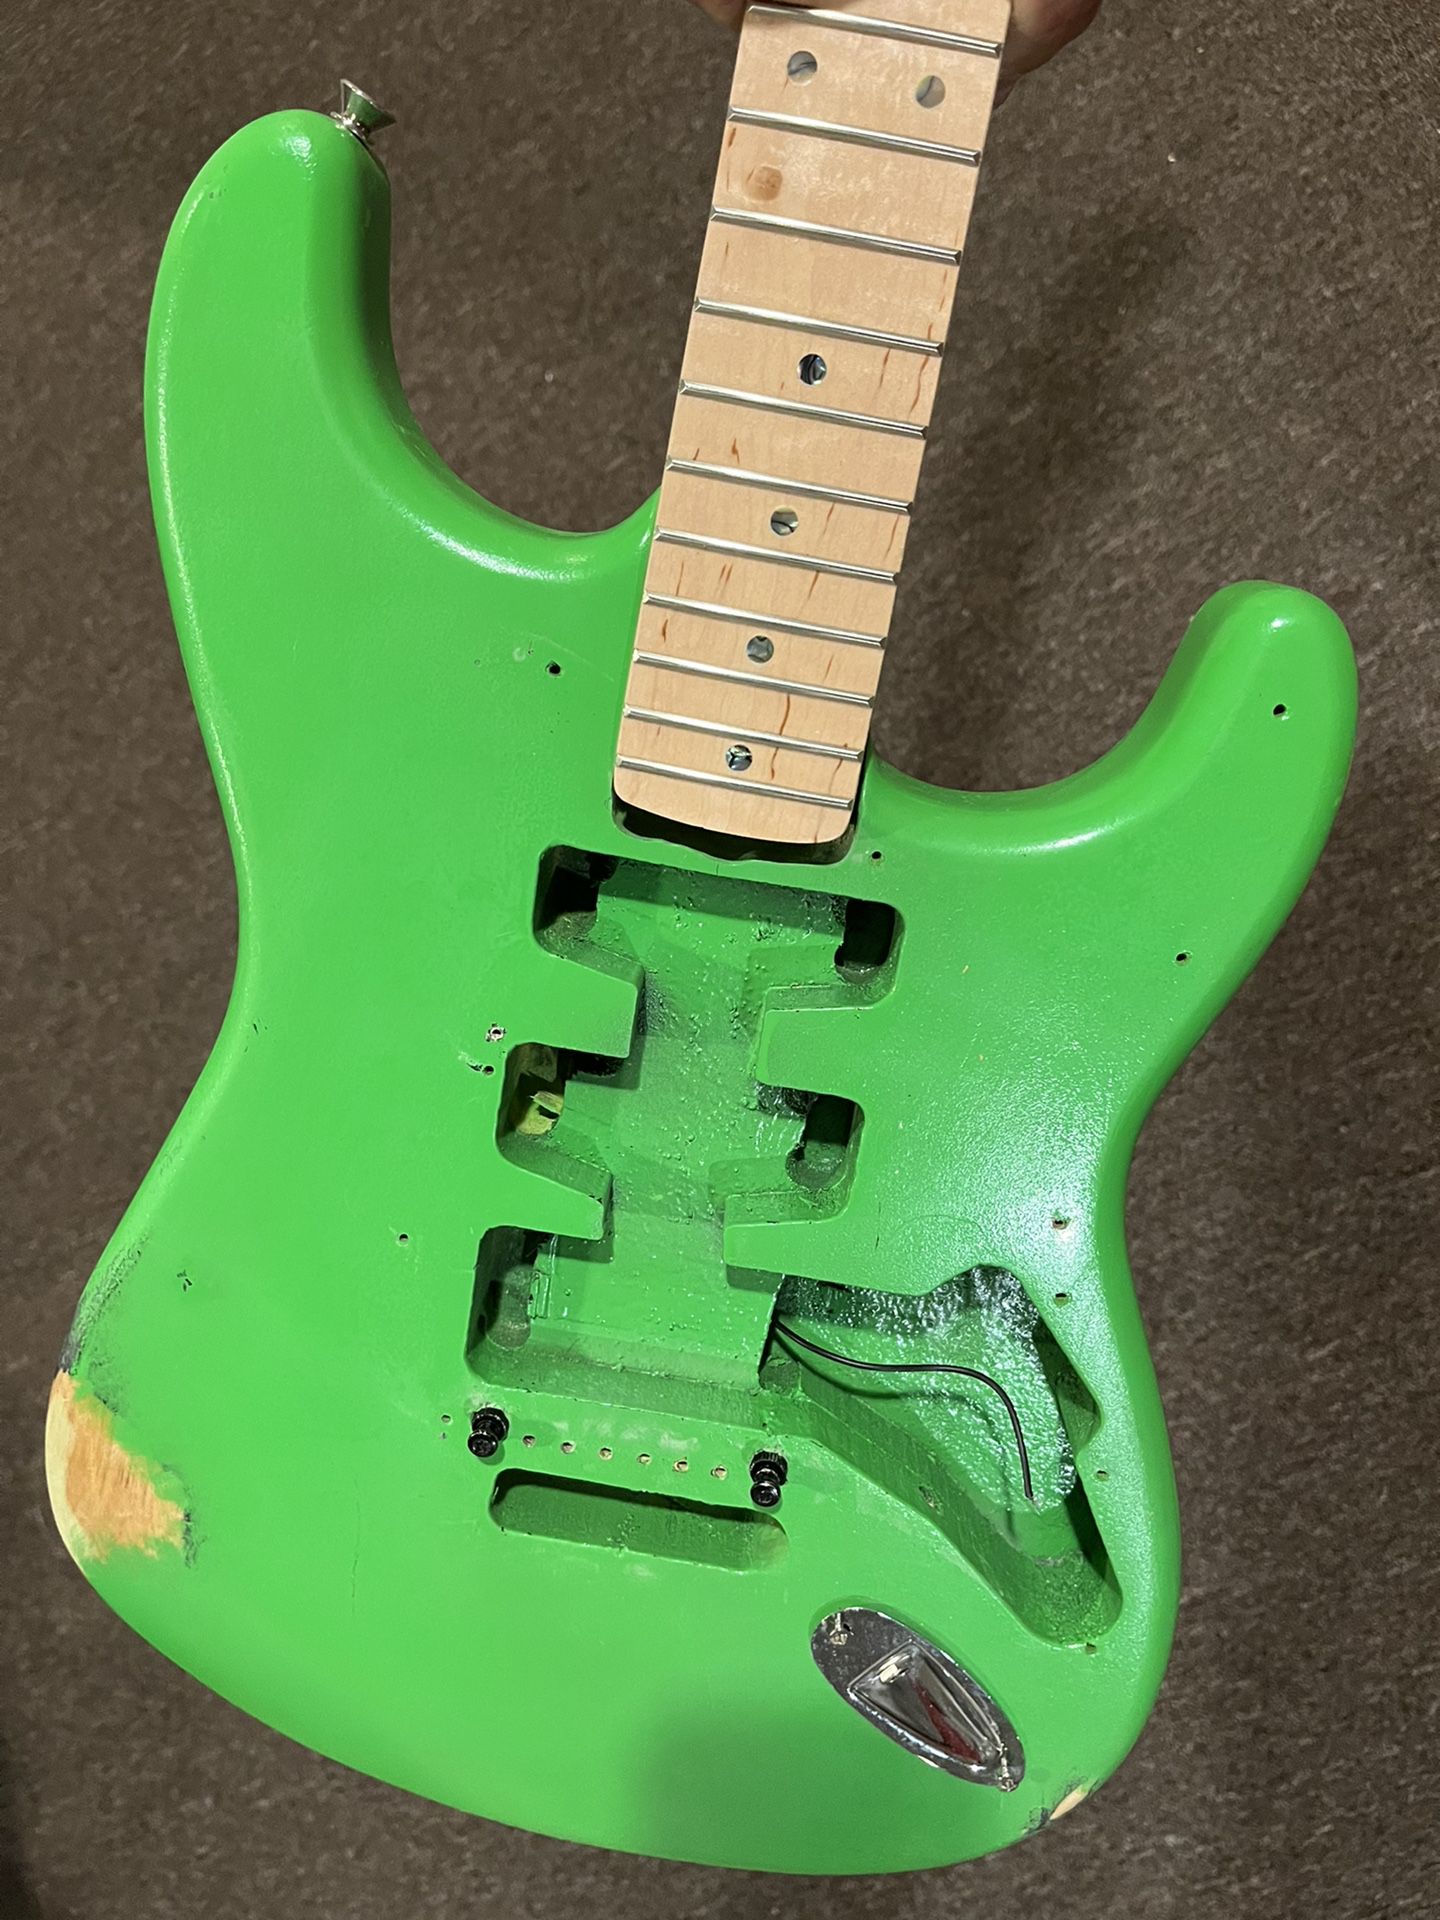 Guitar Body And Neck